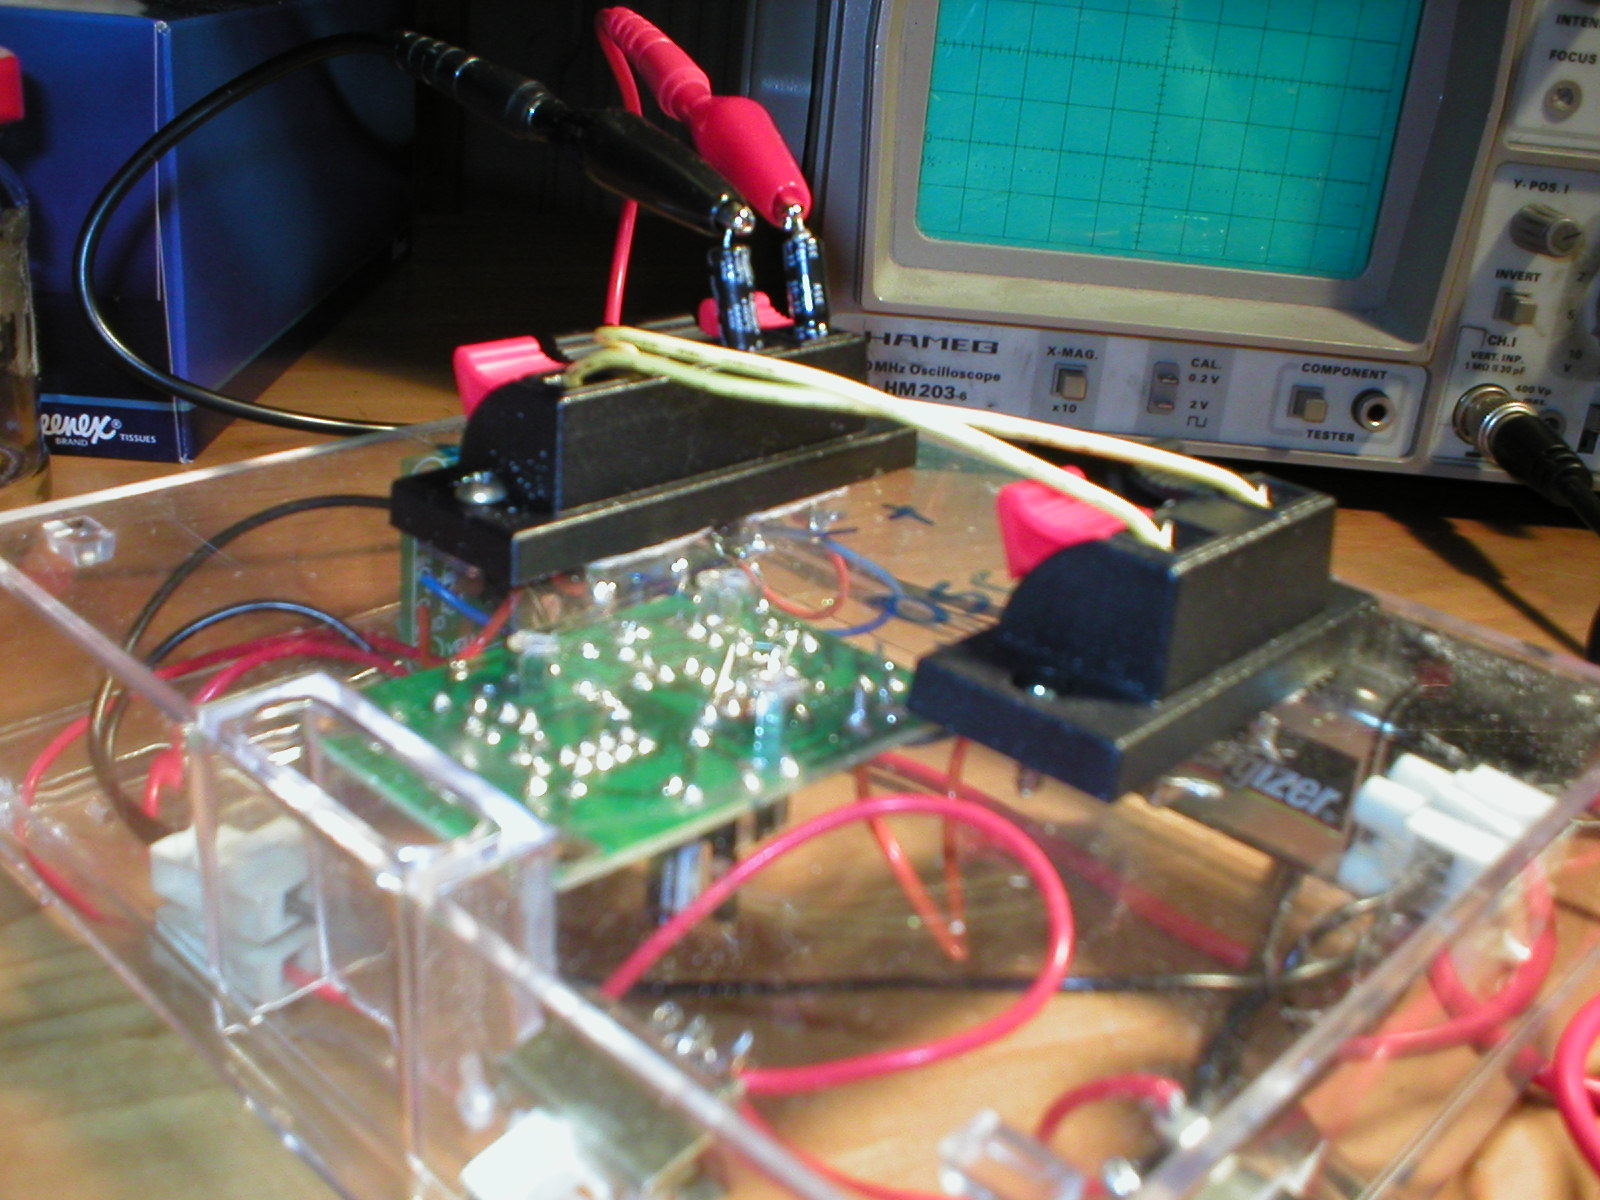 The signal generator connected ready for use